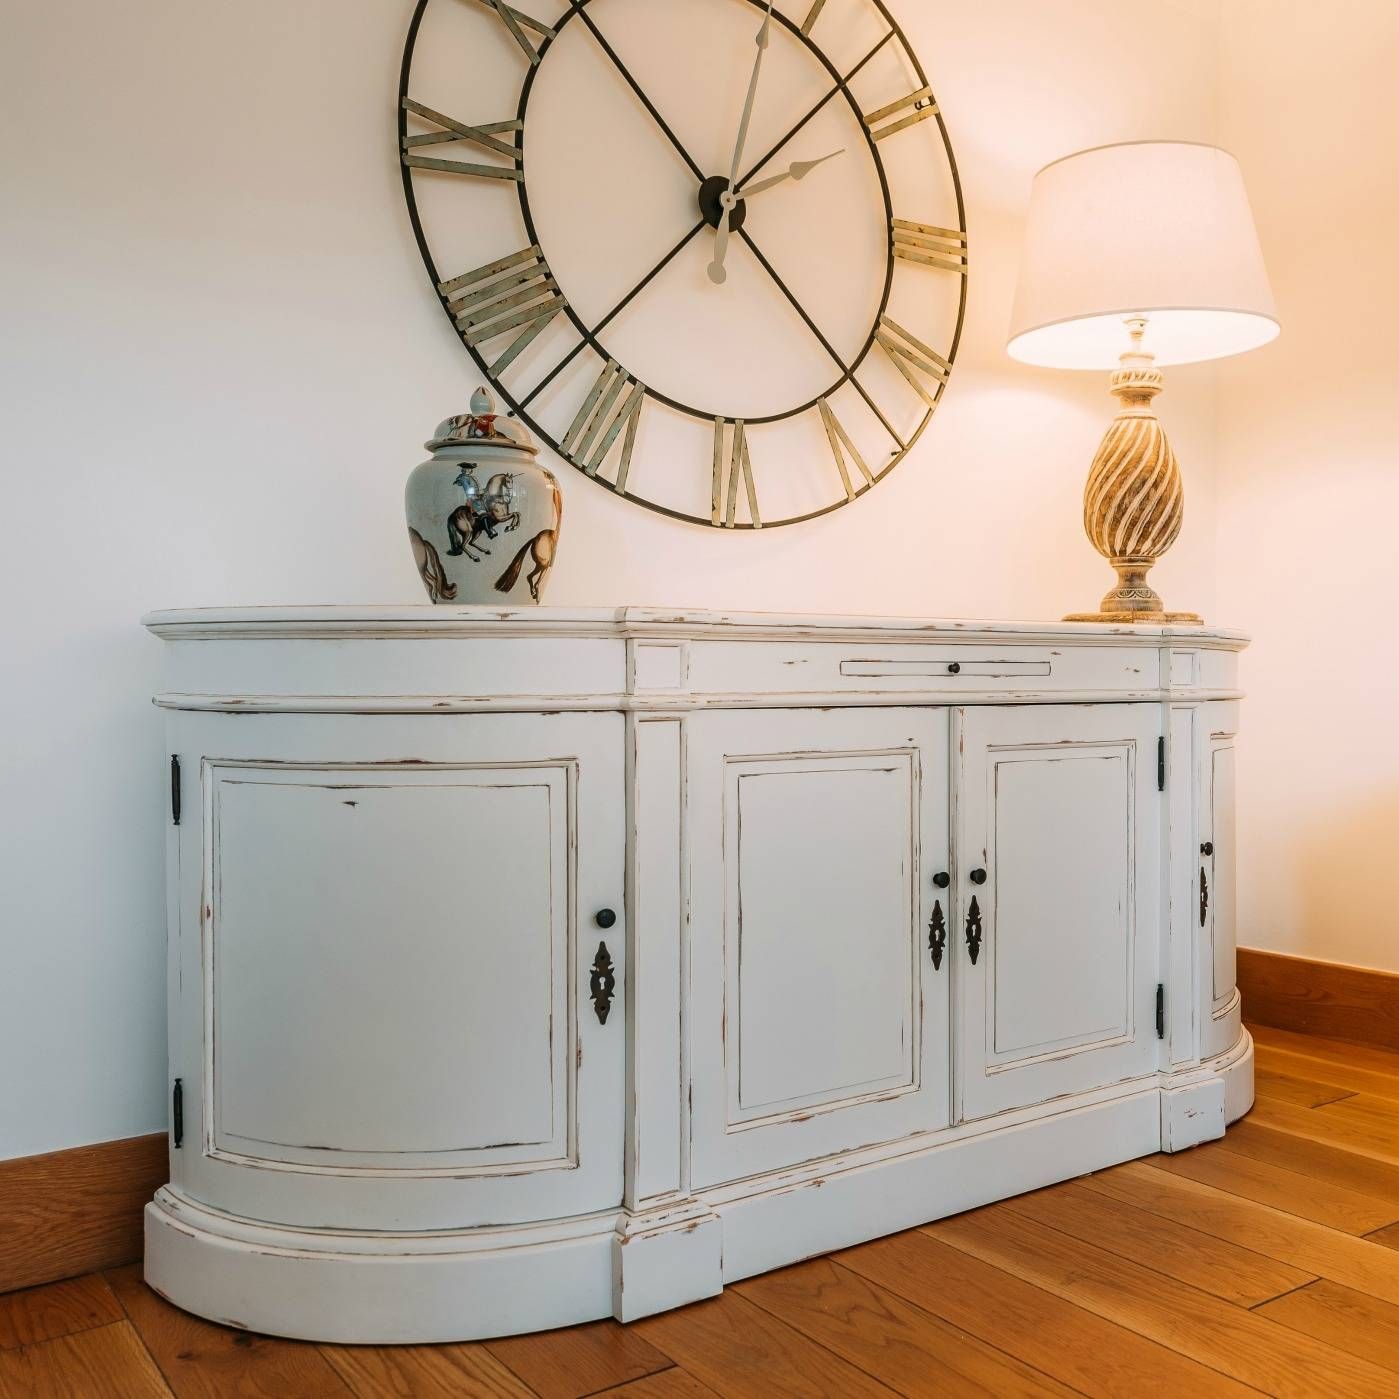 Aged French Distressed White Large Sideboard Furniture – La Maison Throughout Large Sideboards (View 6 of 15)